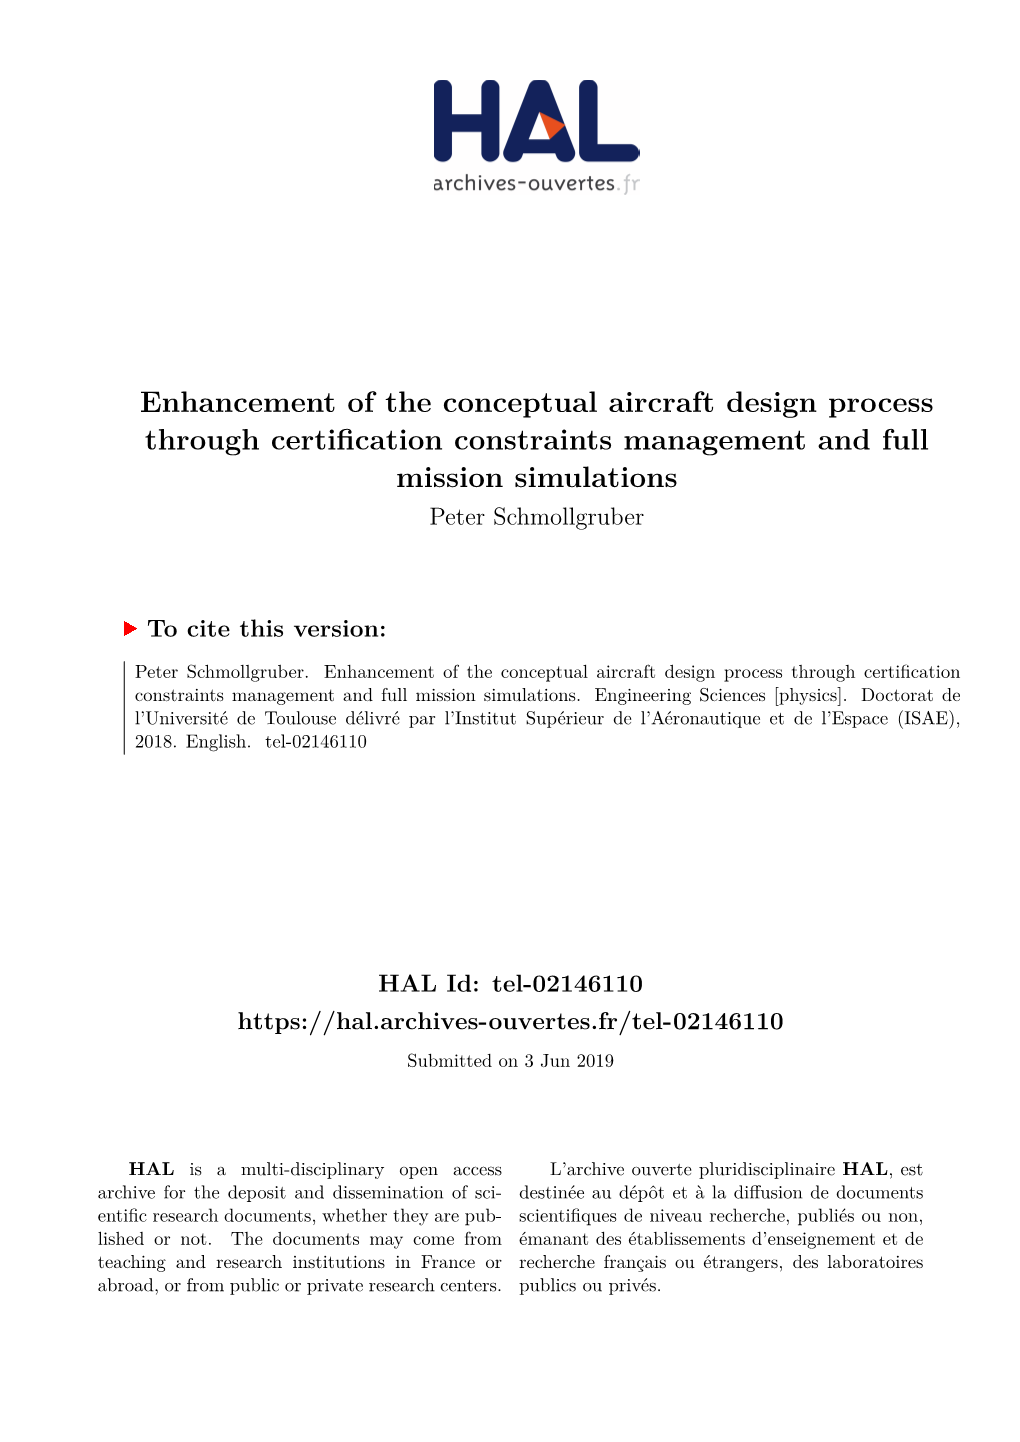 Enhancement of the Conceptual Aircraft Design Process Through Certification Constraints Management and Full Mission Simulations Peter Schmollgruber